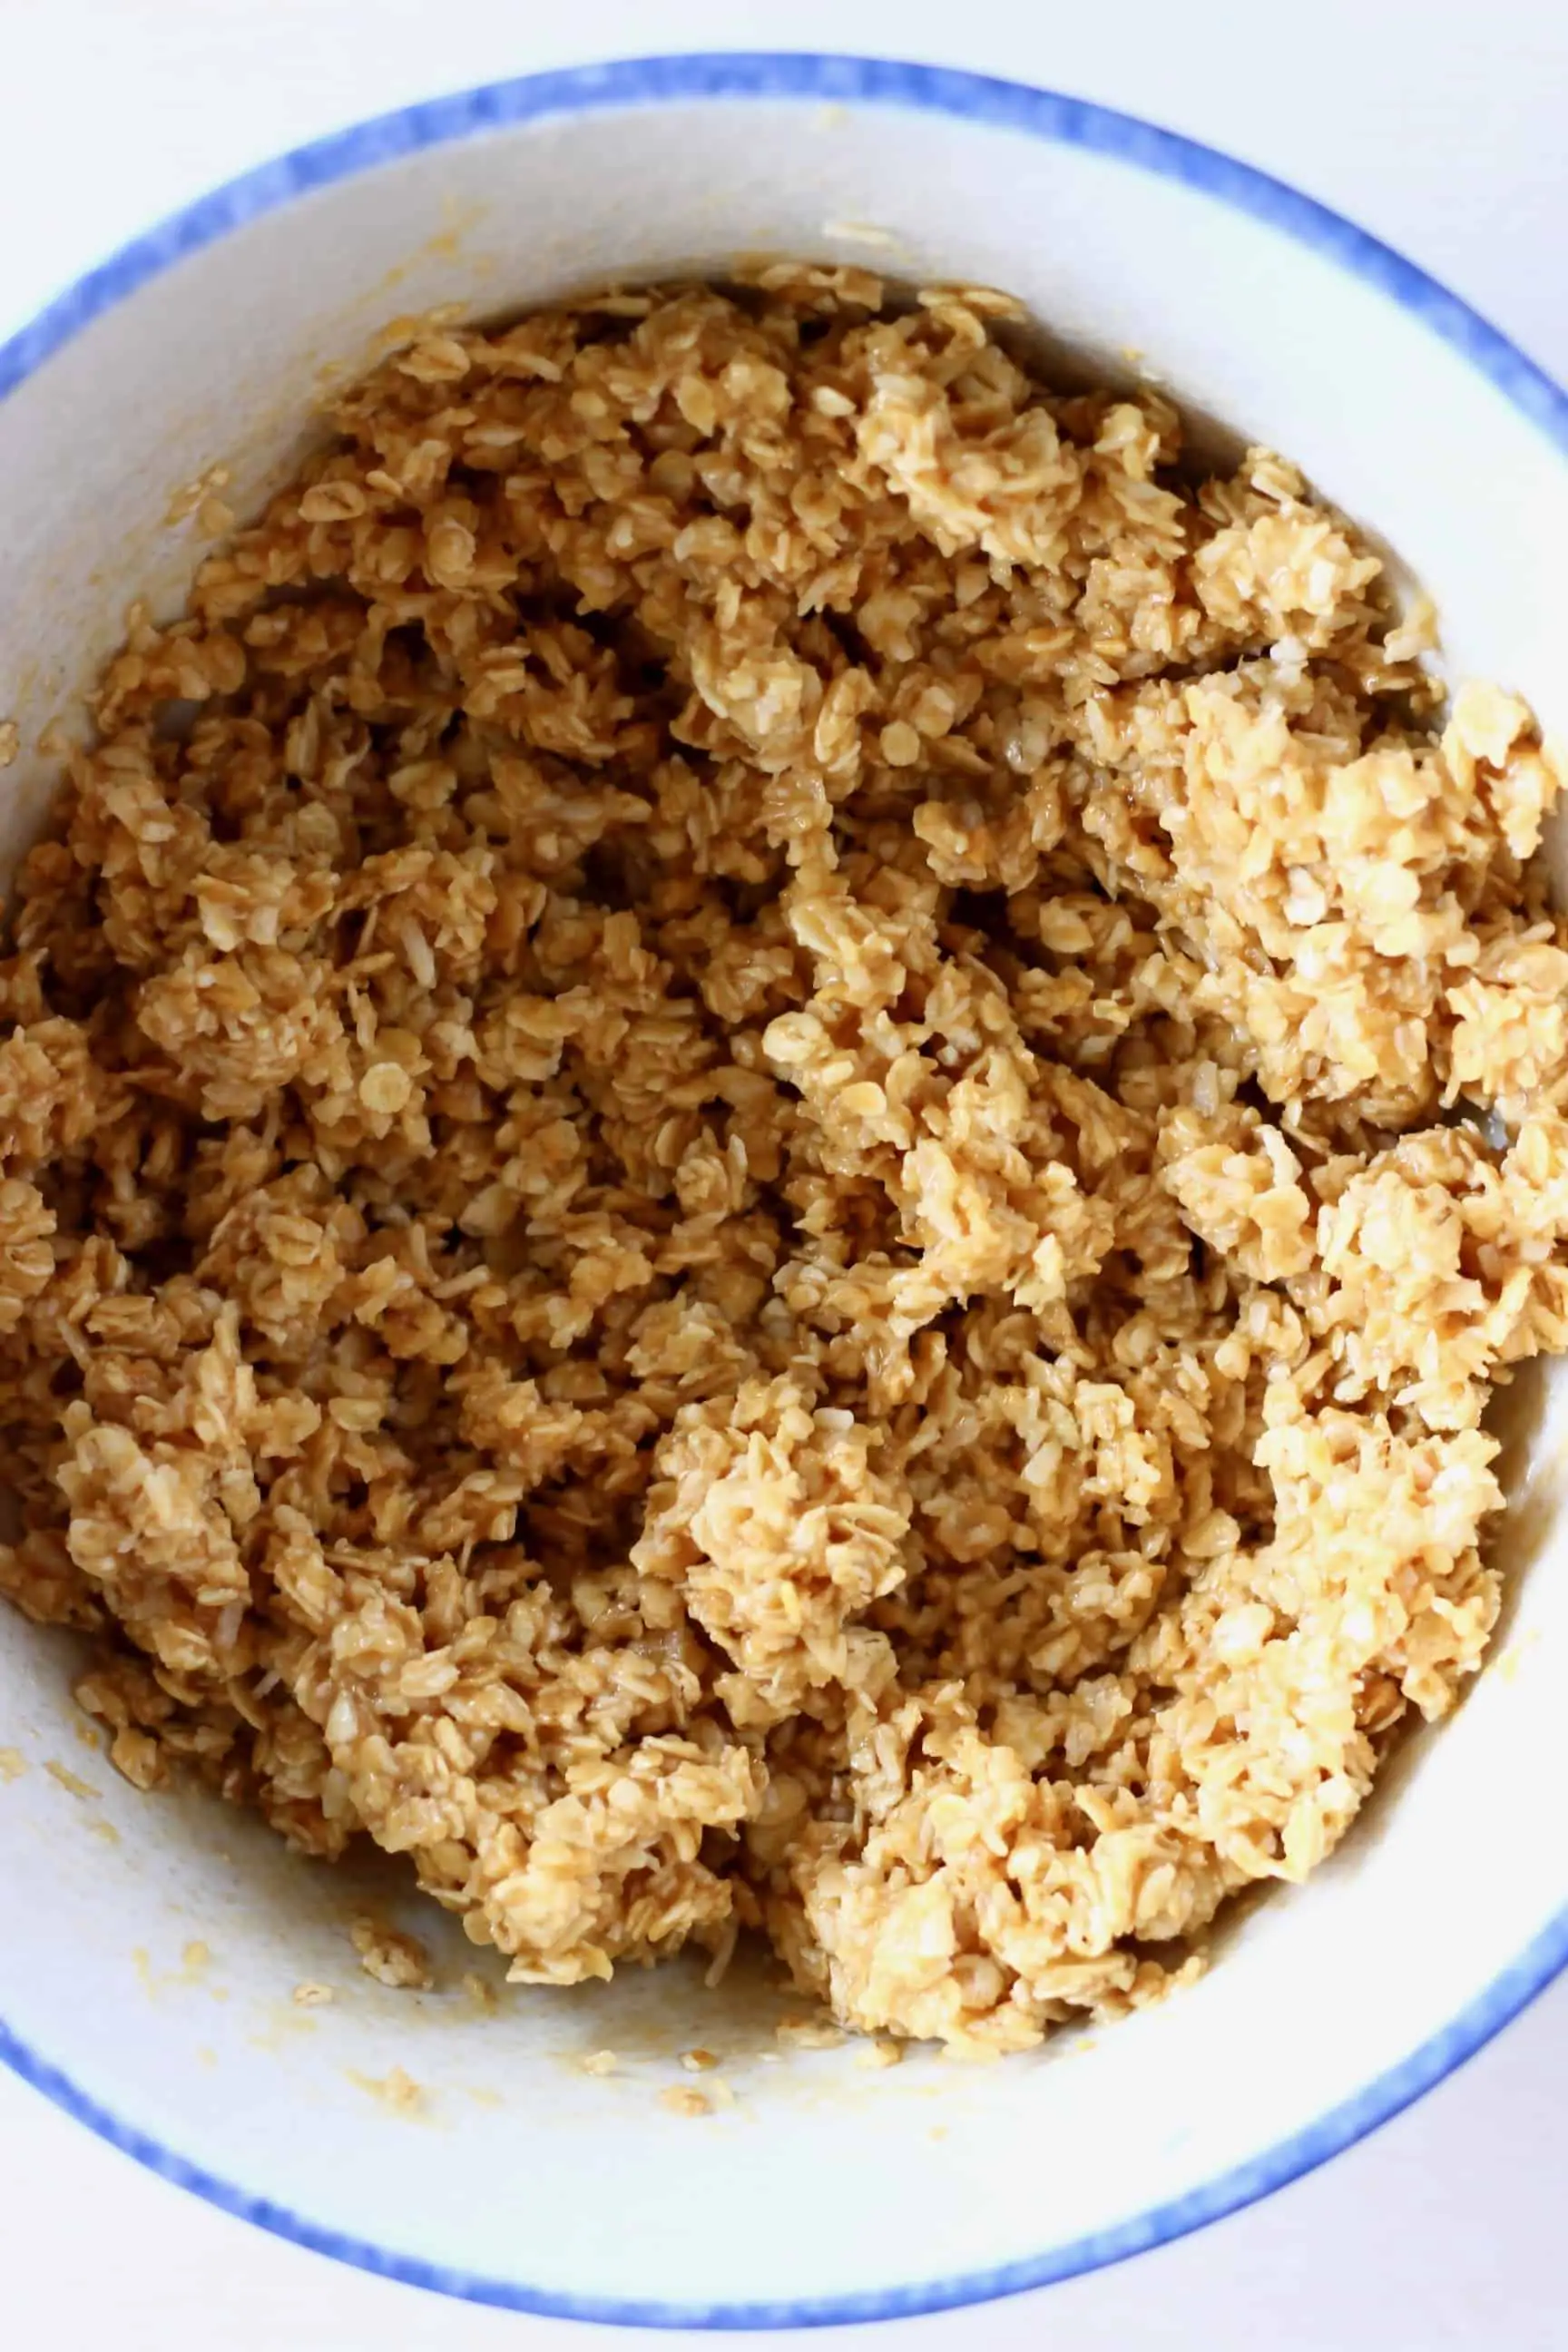 No-bake energy bites mixture with oats, peanut butter and agave syrup in a bowl